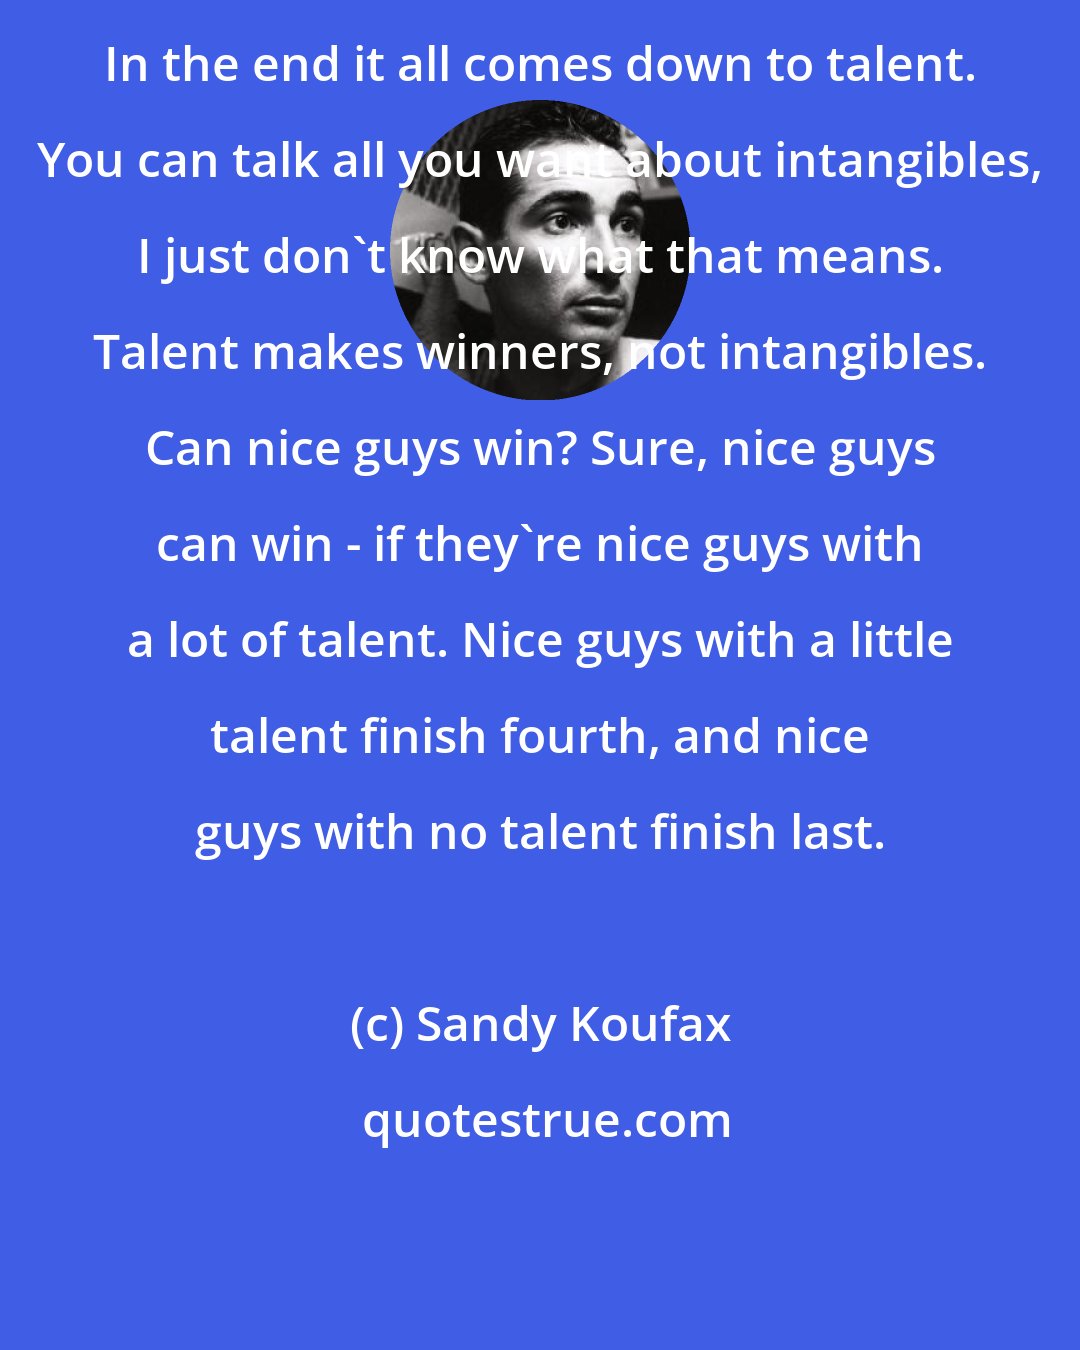 Sandy Koufax: In the end it all comes down to talent. You can talk all you want about intangibles, I just don't know what that means. Talent makes winners, not intangibles. Can nice guys win? Sure, nice guys can win - if they're nice guys with a lot of talent. Nice guys with a little talent finish fourth, and nice guys with no talent finish last.